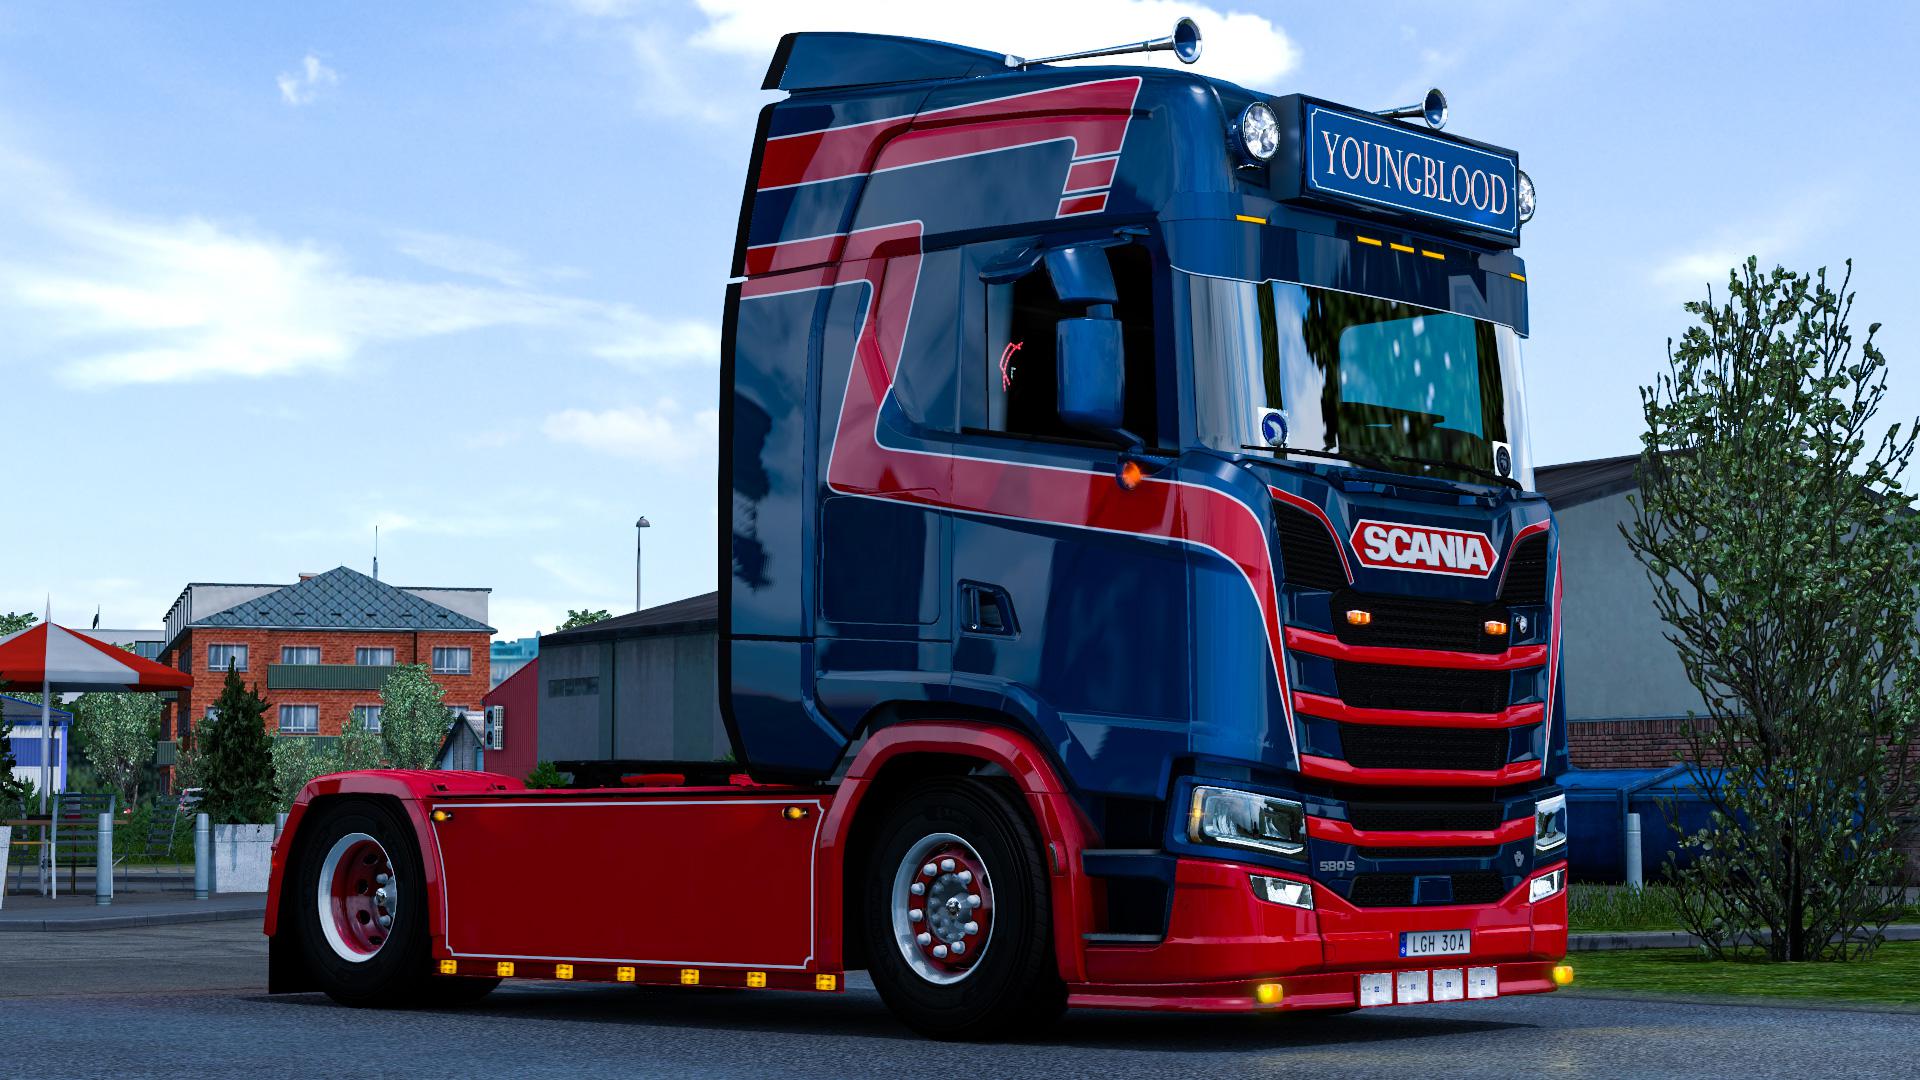 DUTCH STYLE METALLIC SKIN FOR SCANIA S V1.0 - ETS 2 mods, Ets2 map